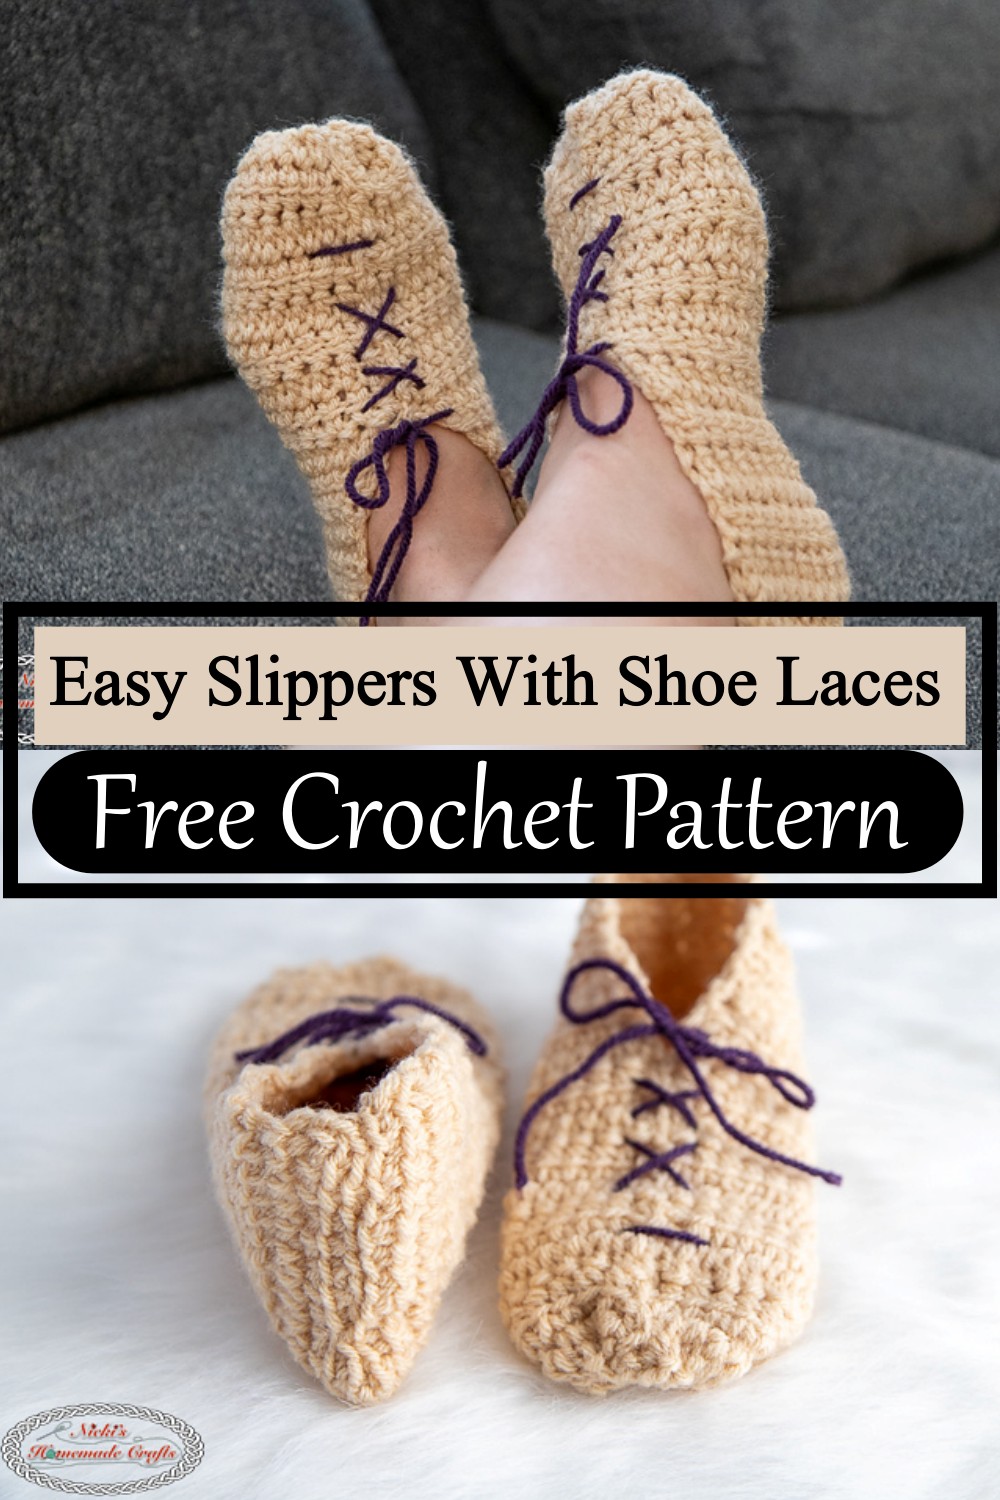 Easy Slippers With Shoe Laces